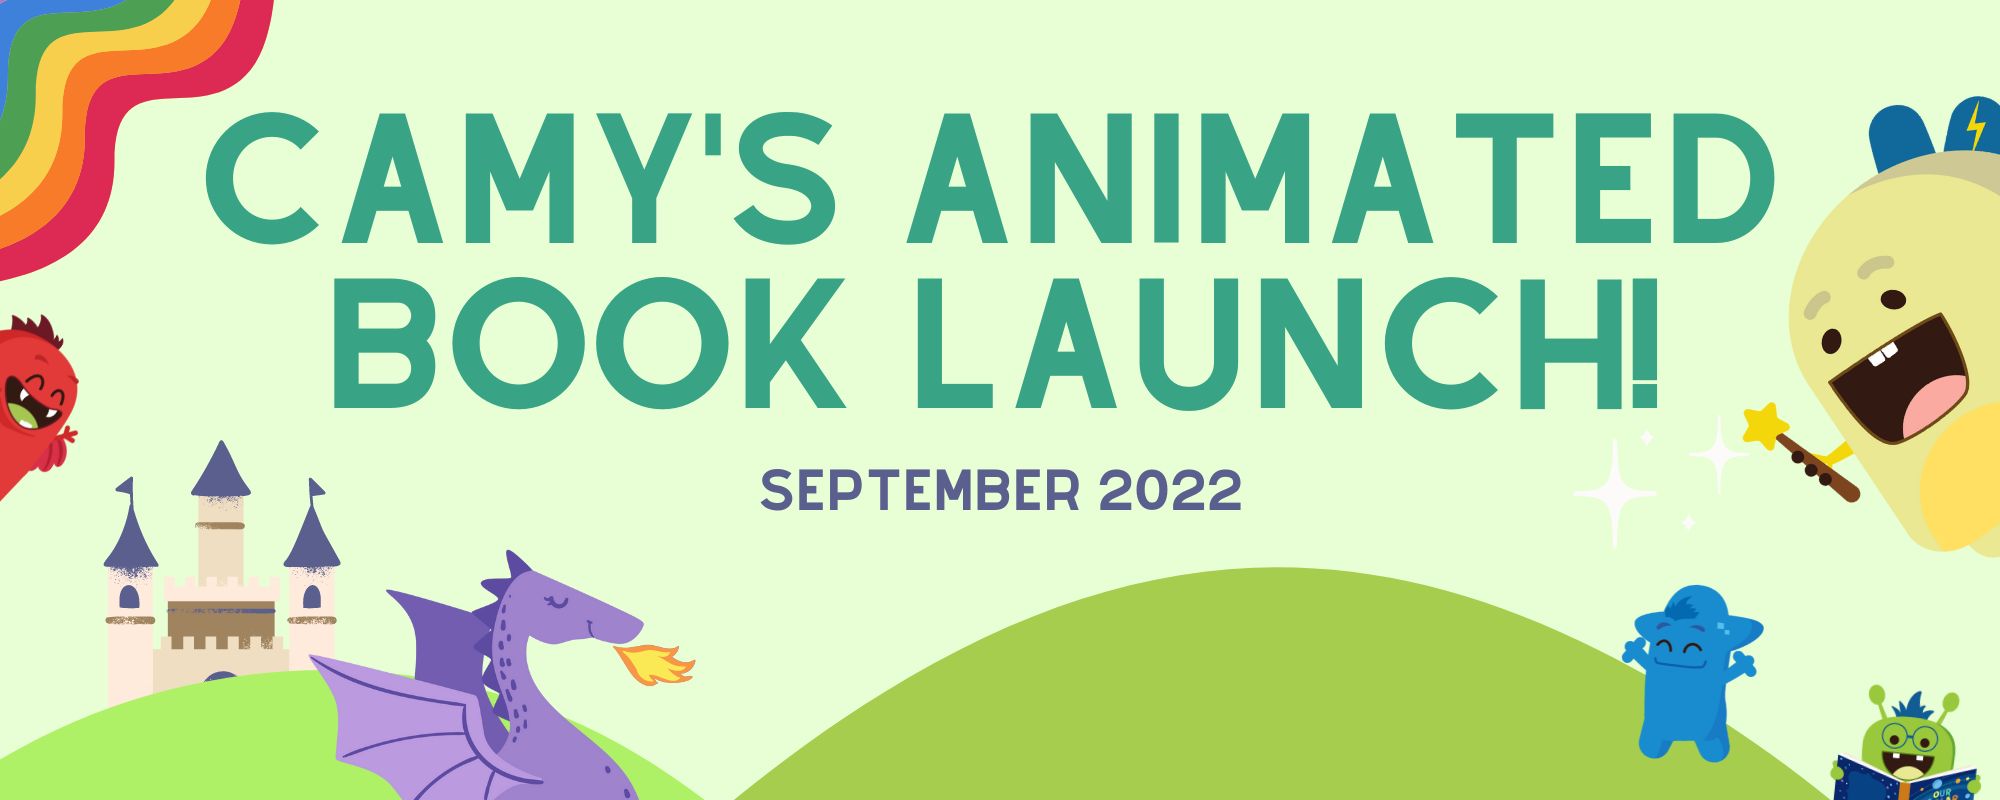 Camy’s Animated Book Launch